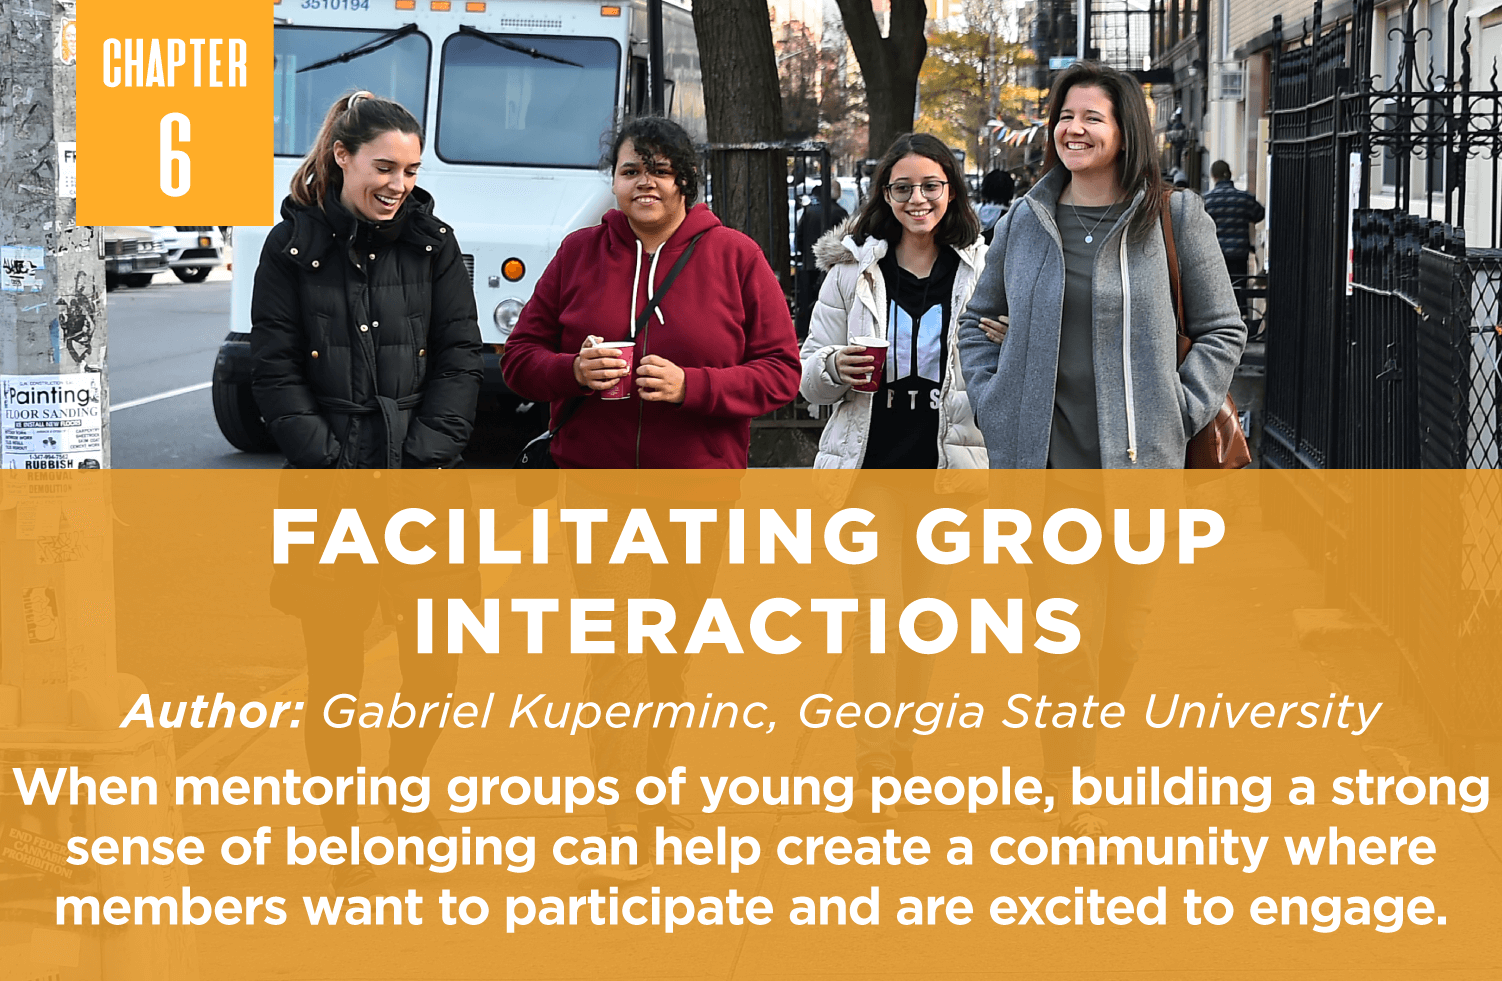 Facilitating Group
Interactions
Author: Gabriel Kuperminc, Georgia State University
When mentoring groups of young people, building a strong sense of belonging can help create a community where members want to participate and are excited to engage.